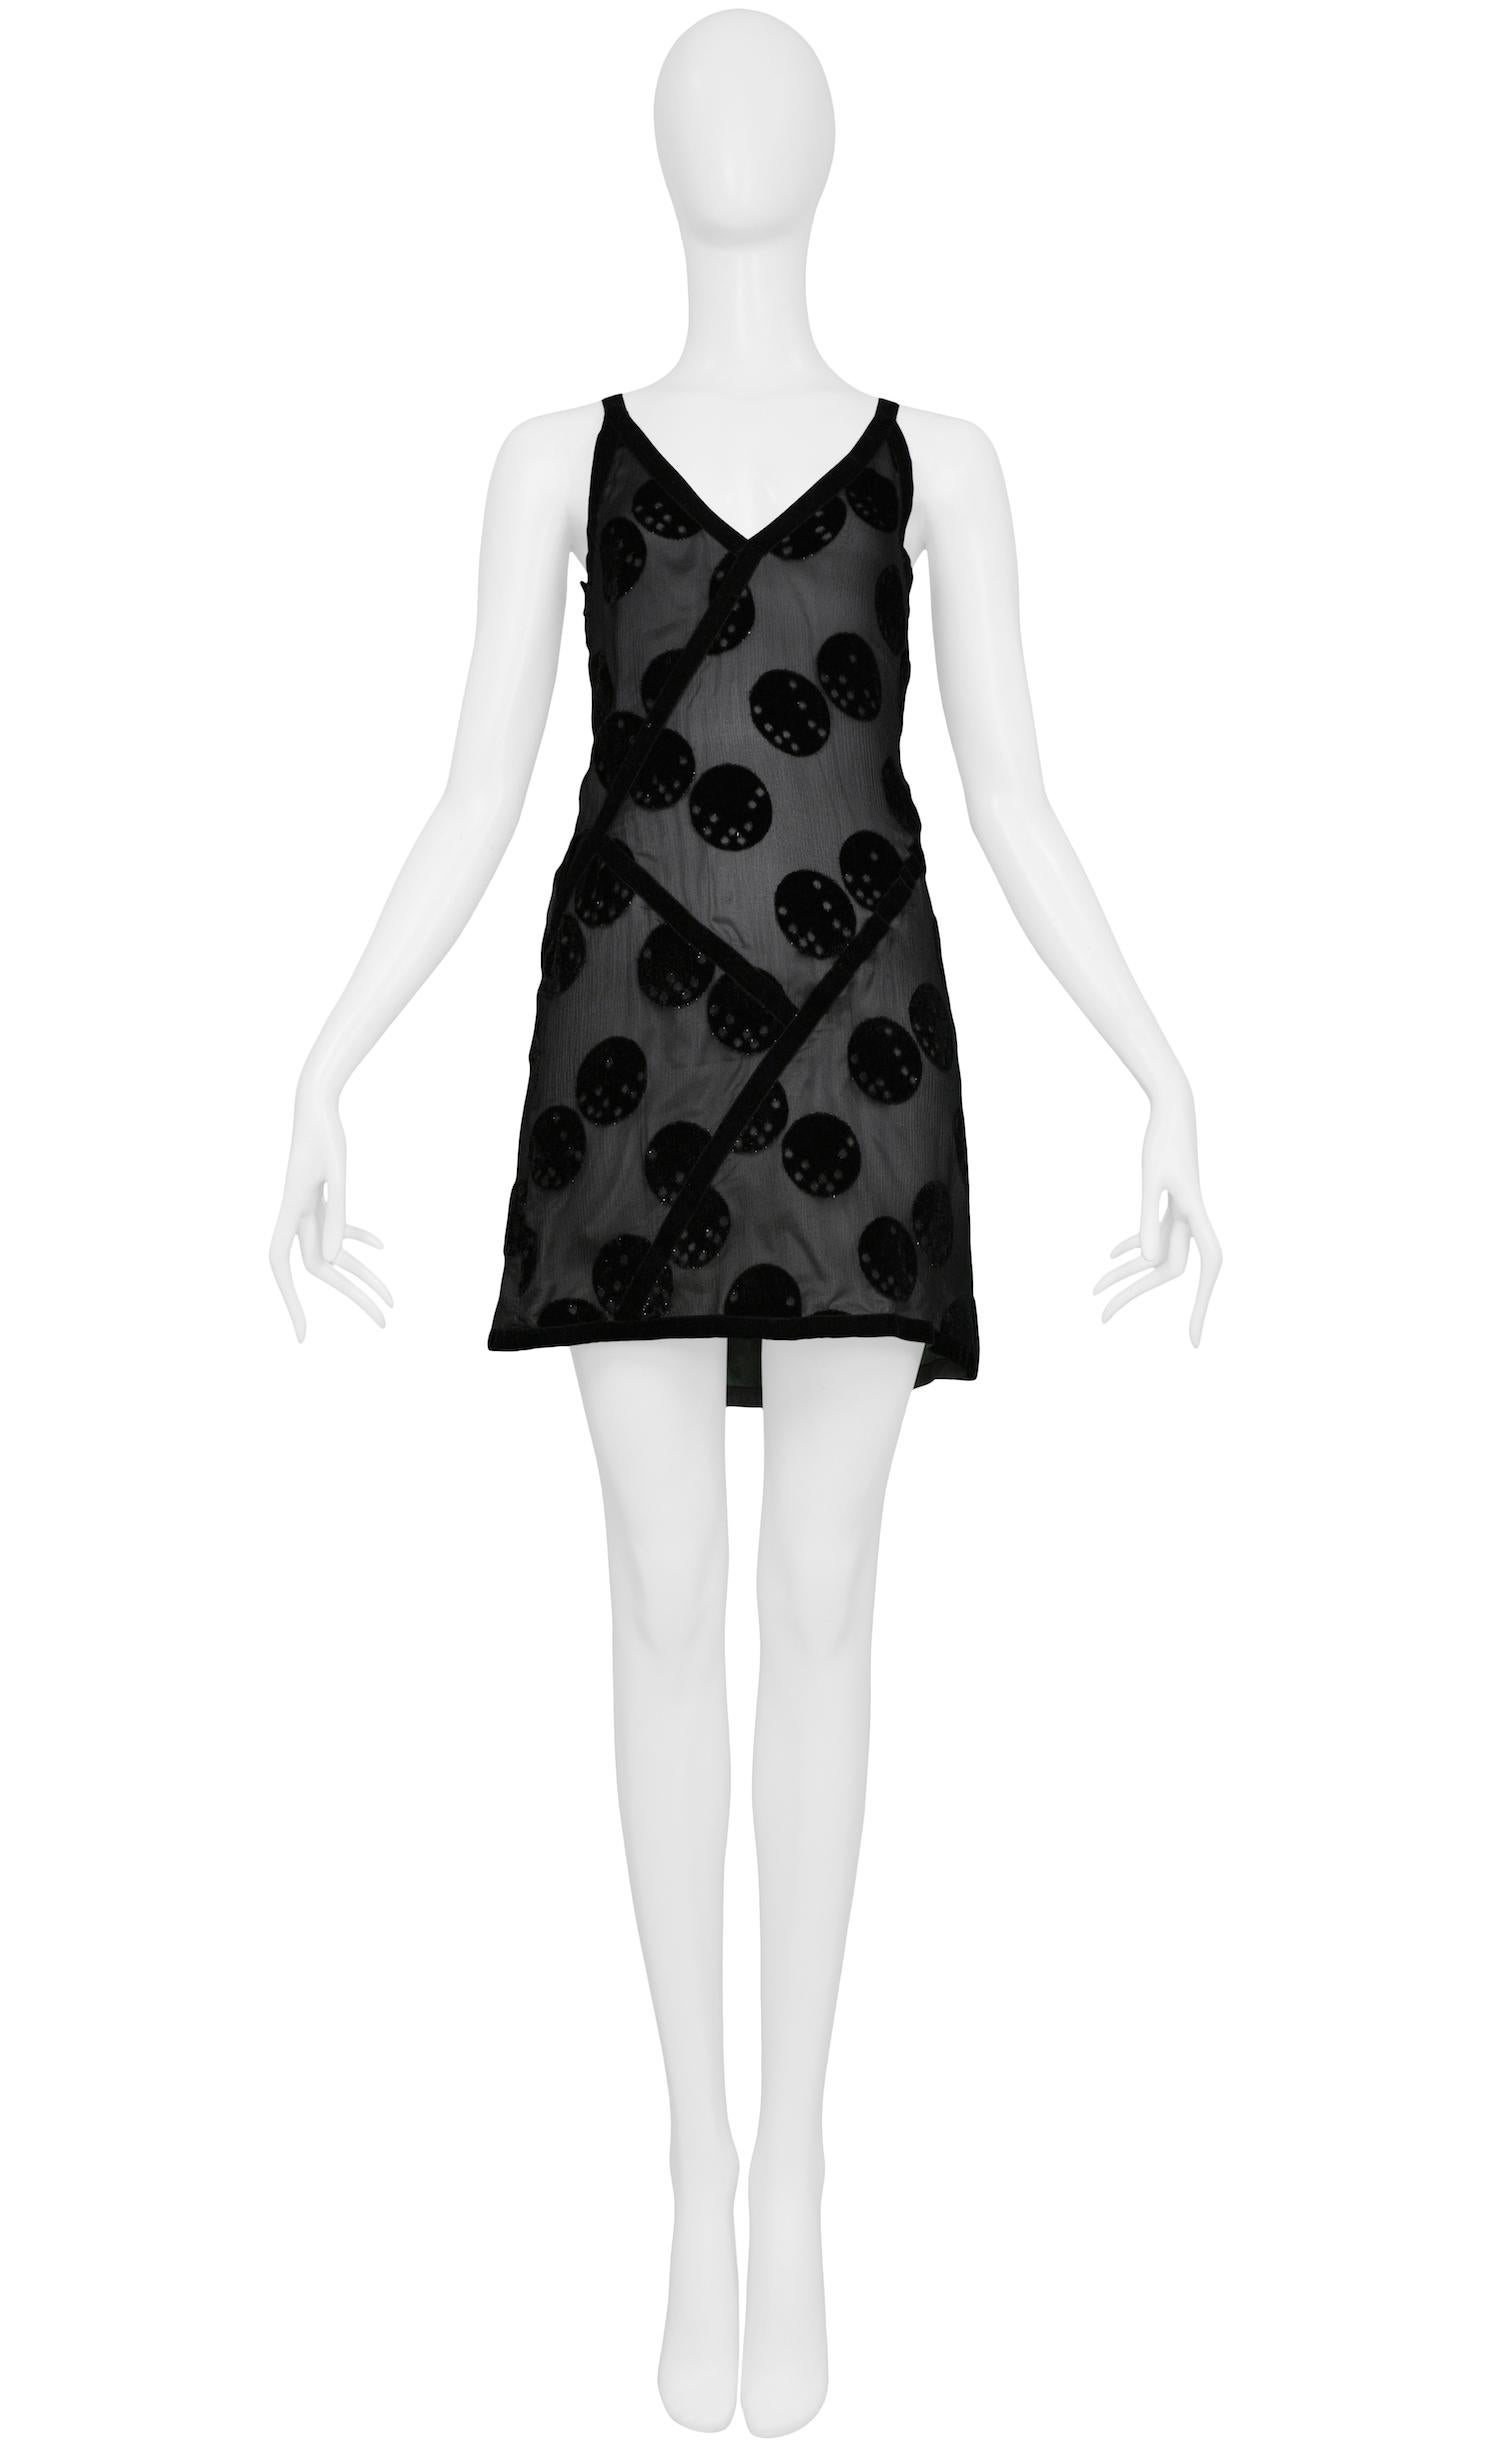 Vintage Andres Courreges silver mini slip dress with black chiffon overlay. The dress features a v-neckline, polka dot velvet burnout design throughout, and patchwork-style velvet trim detail. Side zipper closure as well as hook and eye closure at